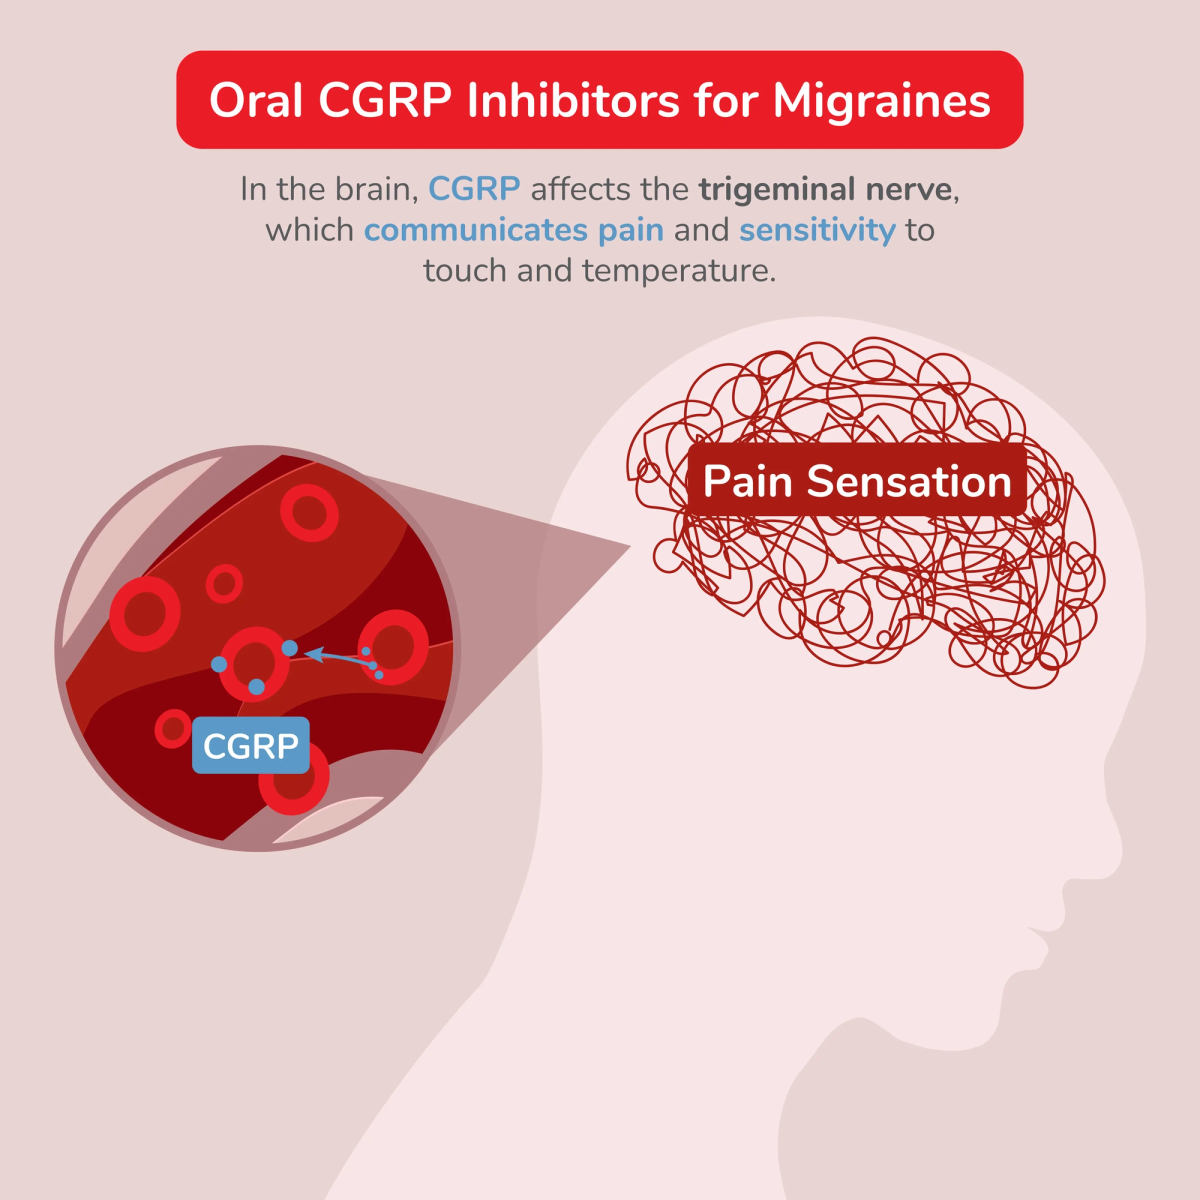 Illustration of CGRP Inhibitors for Migraines Affecting the Trigeminal Nerve 